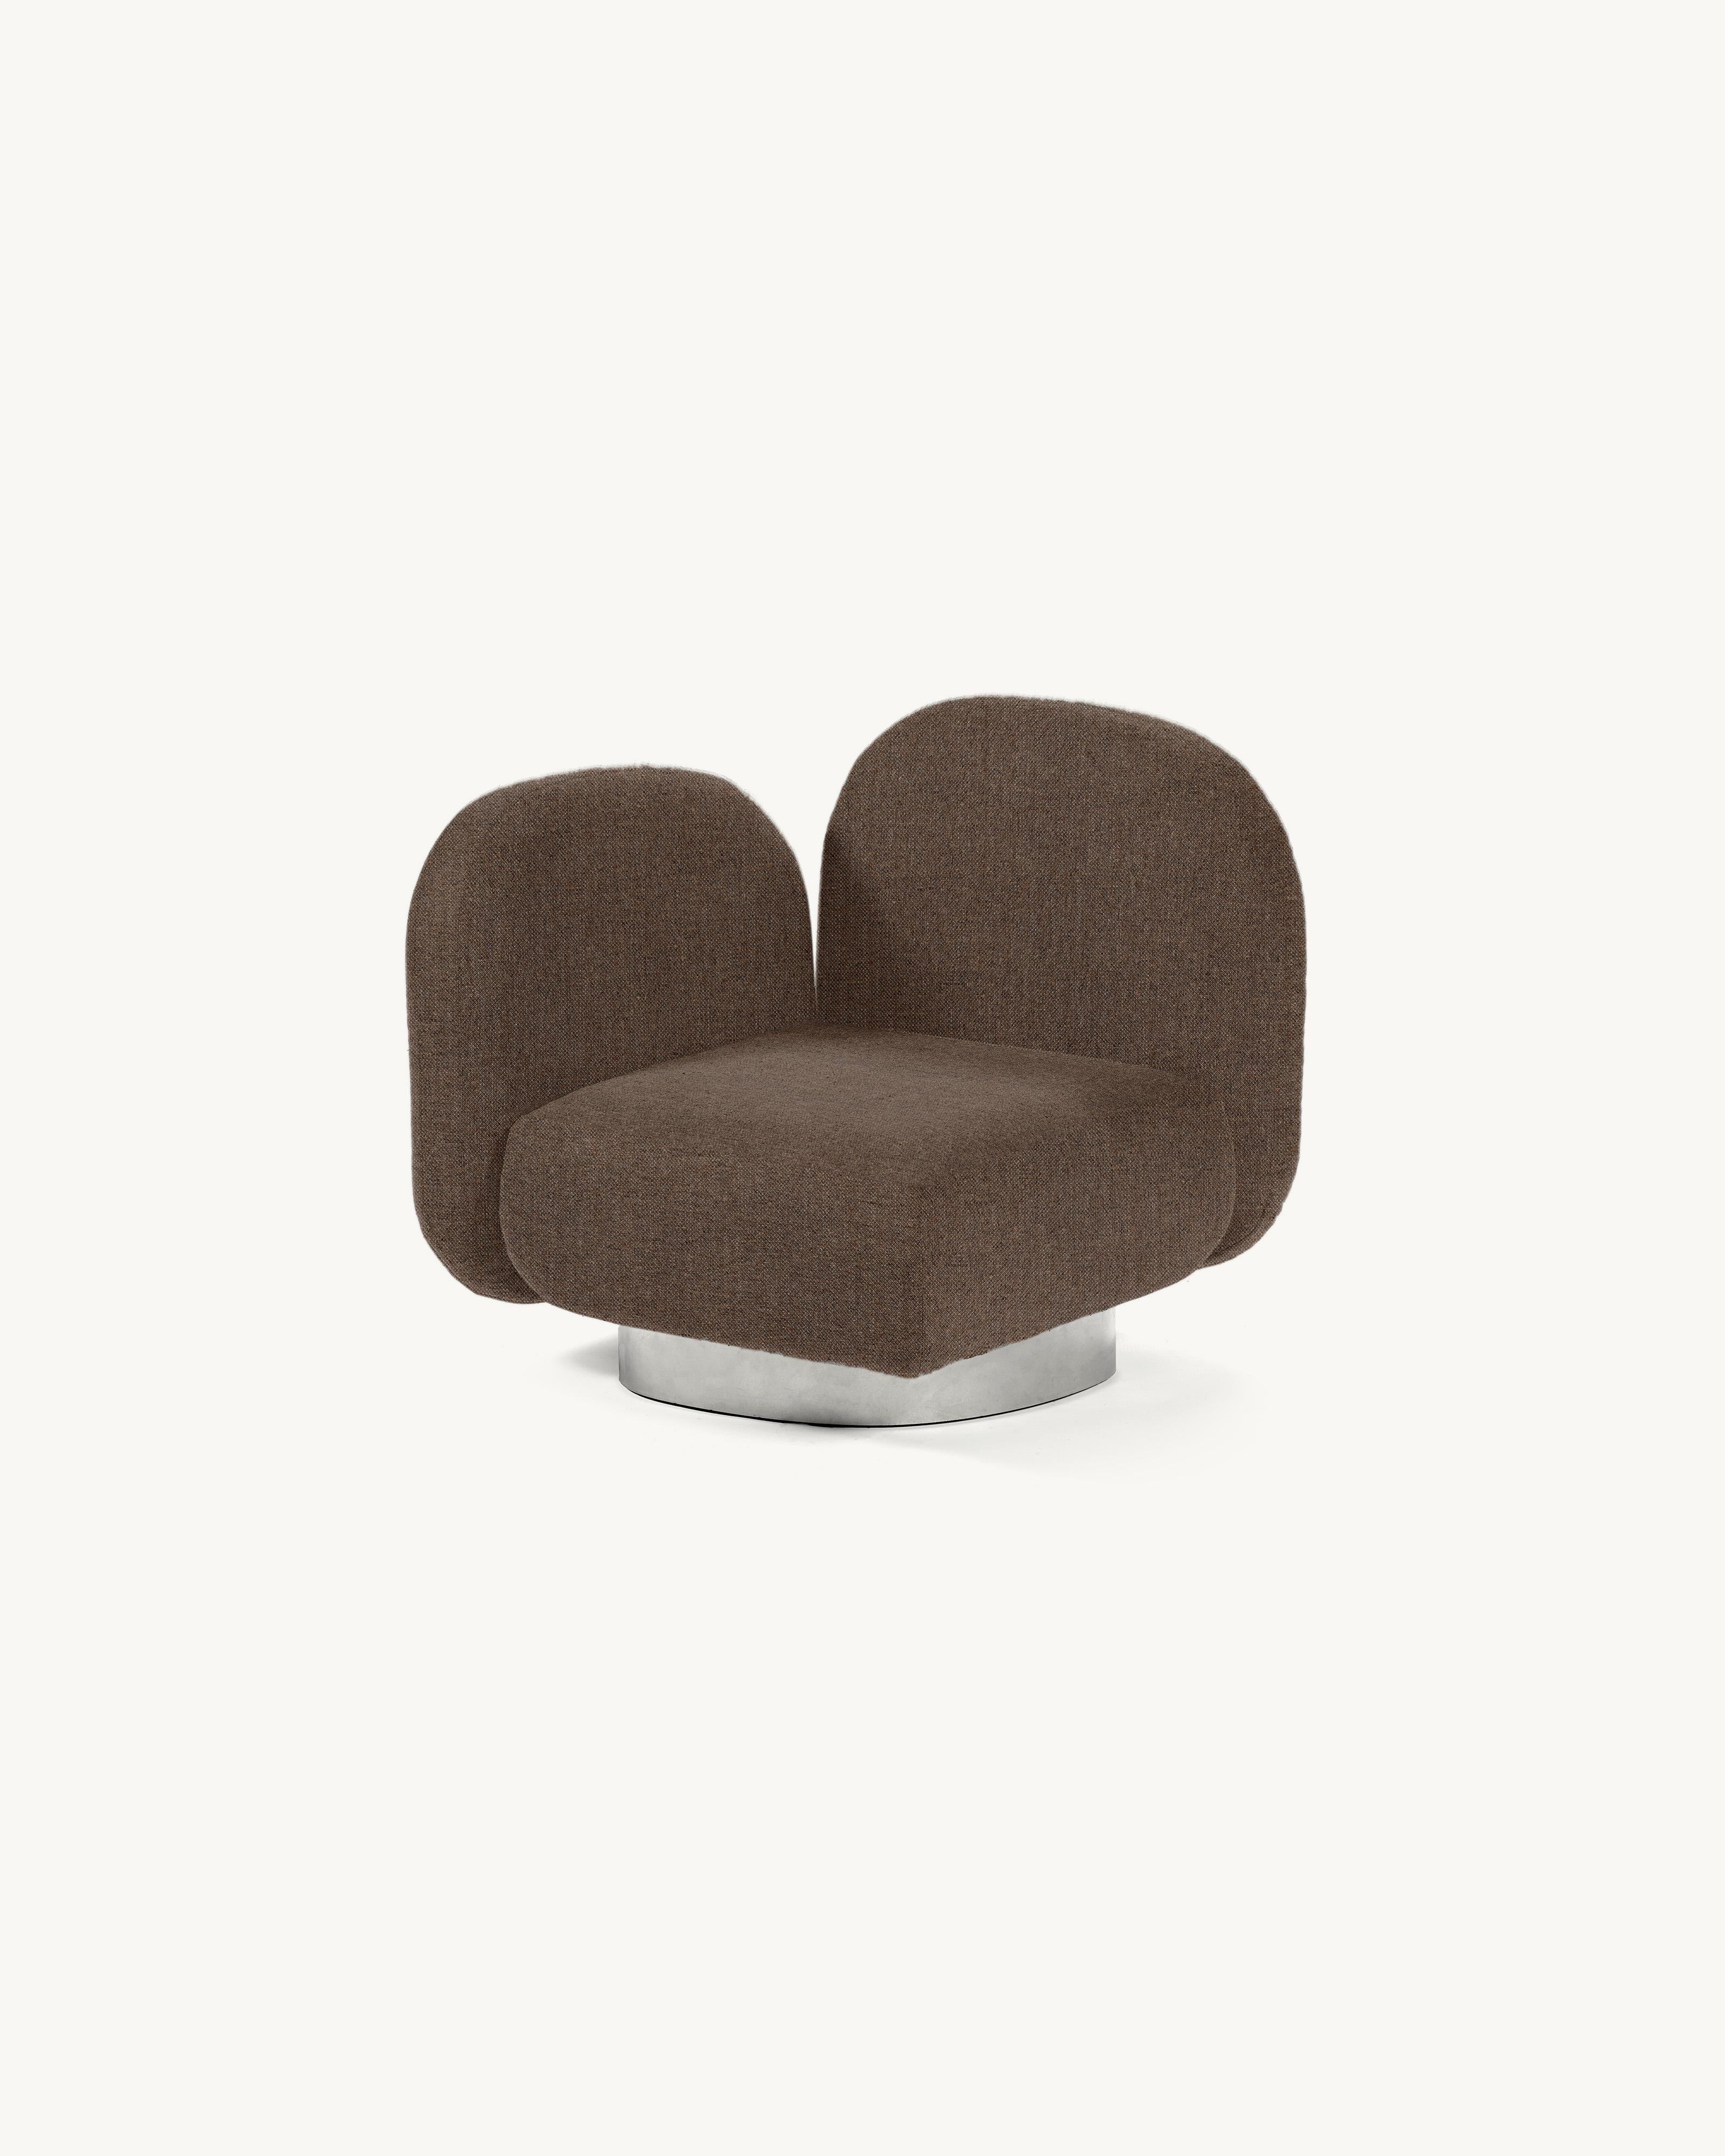 Lounge Chair / Corner Assemble 
Designed by Destroyers/Builders x Valerie Objects
Upholstery: gijon sand
Code: V9020311

Dimensions: L 87 W 88 H 85 CM (SH 40 cm)
Materials: Wood, aluminium and upholstery

The ASSEMBLE sofa encourages exactly what